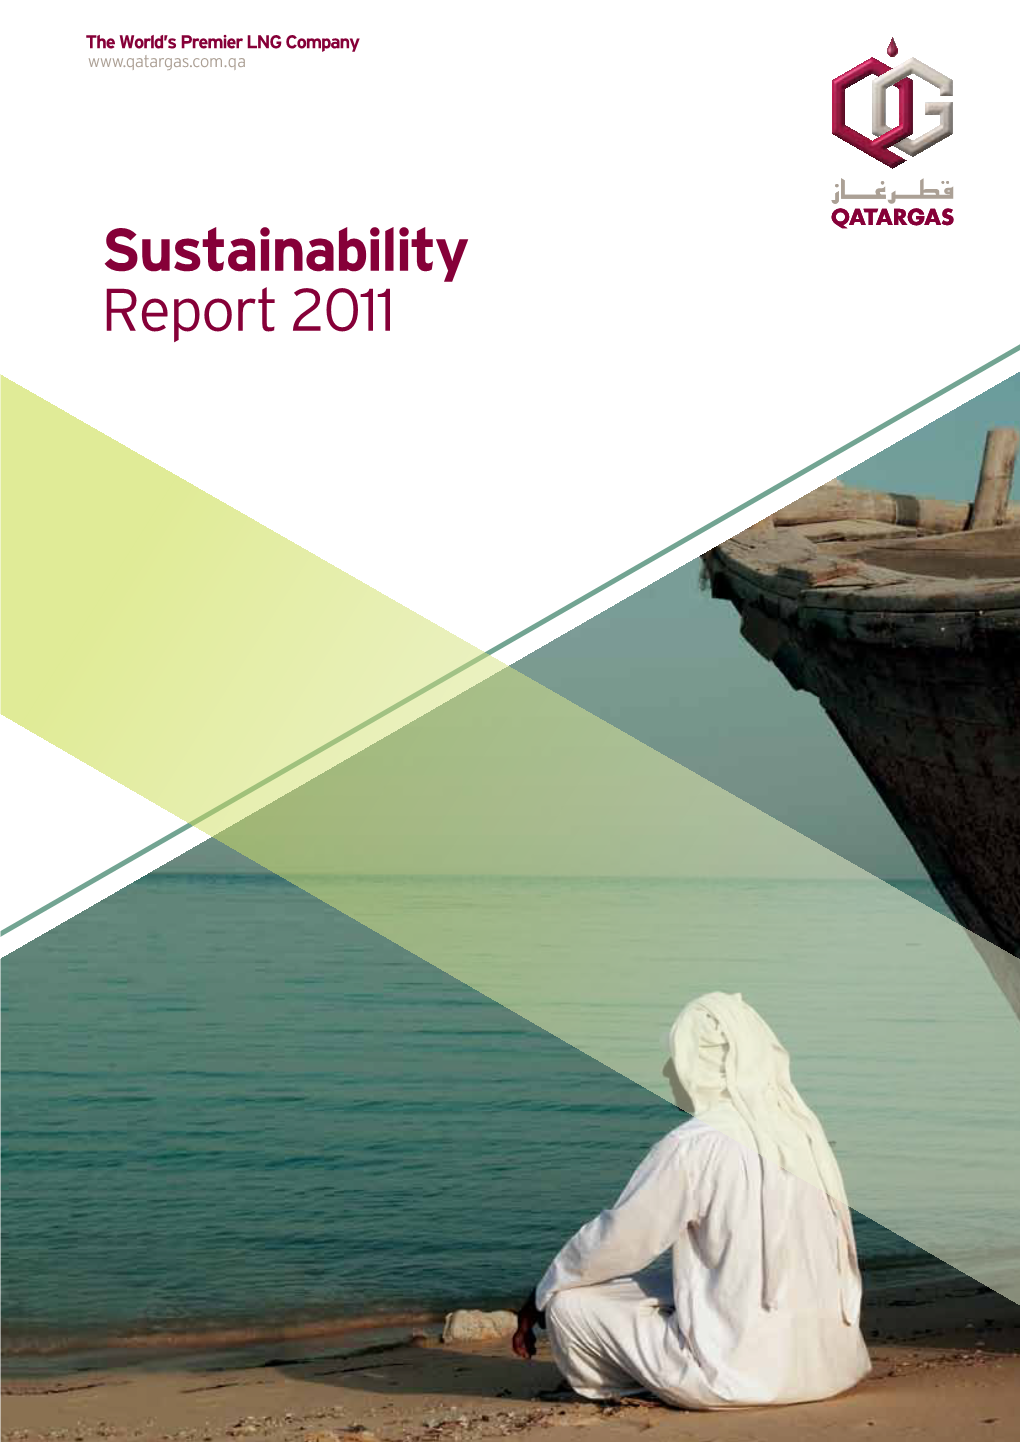 Sustainability Report 2011 This Publication Was Printed in Qatar